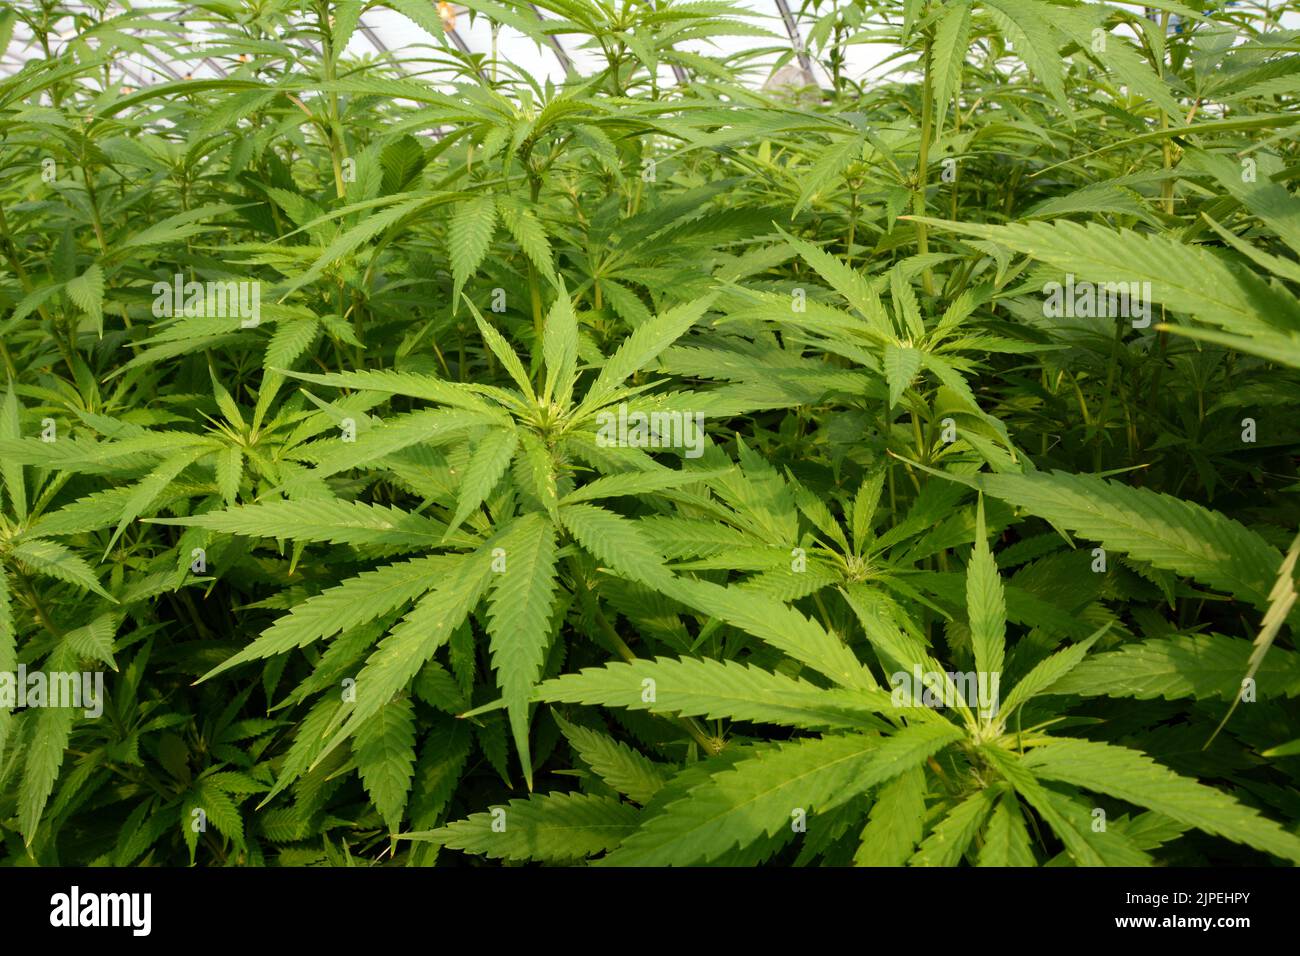 Legal recreational marijuana or cannabis plants being grown in a greenhouse on a sustainable farm near the town of Creemore, Ontario, Canada. Stock Photo